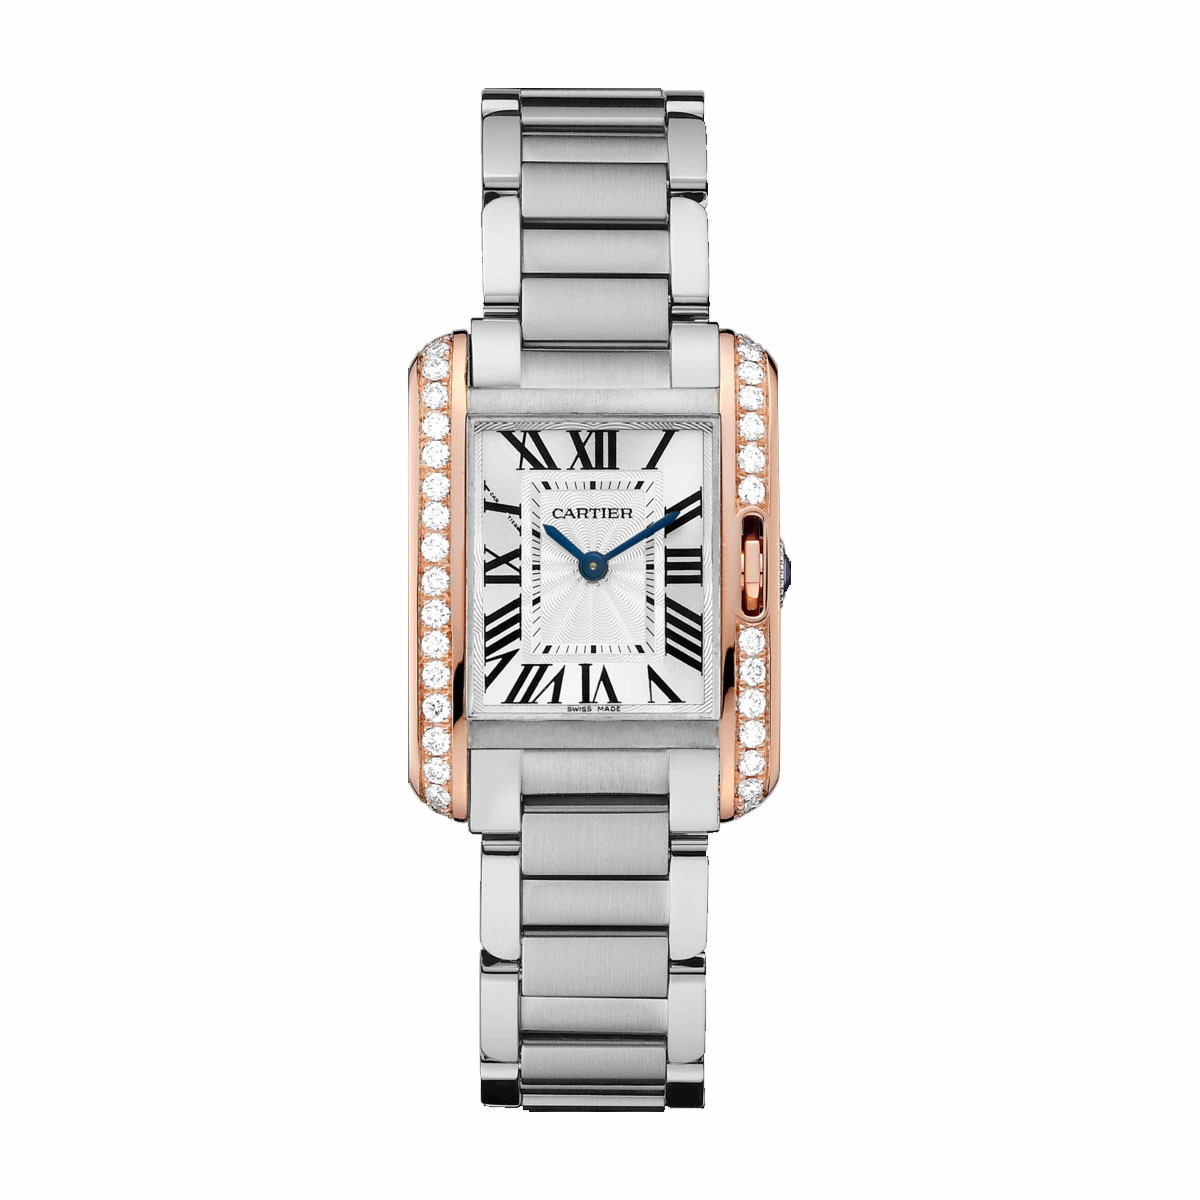 CARTIER TANK WATCH ANGLAISE W3TA0002 30.2 mm, STEEL AND GOLD ROSE, STEEL, DIAMONDS